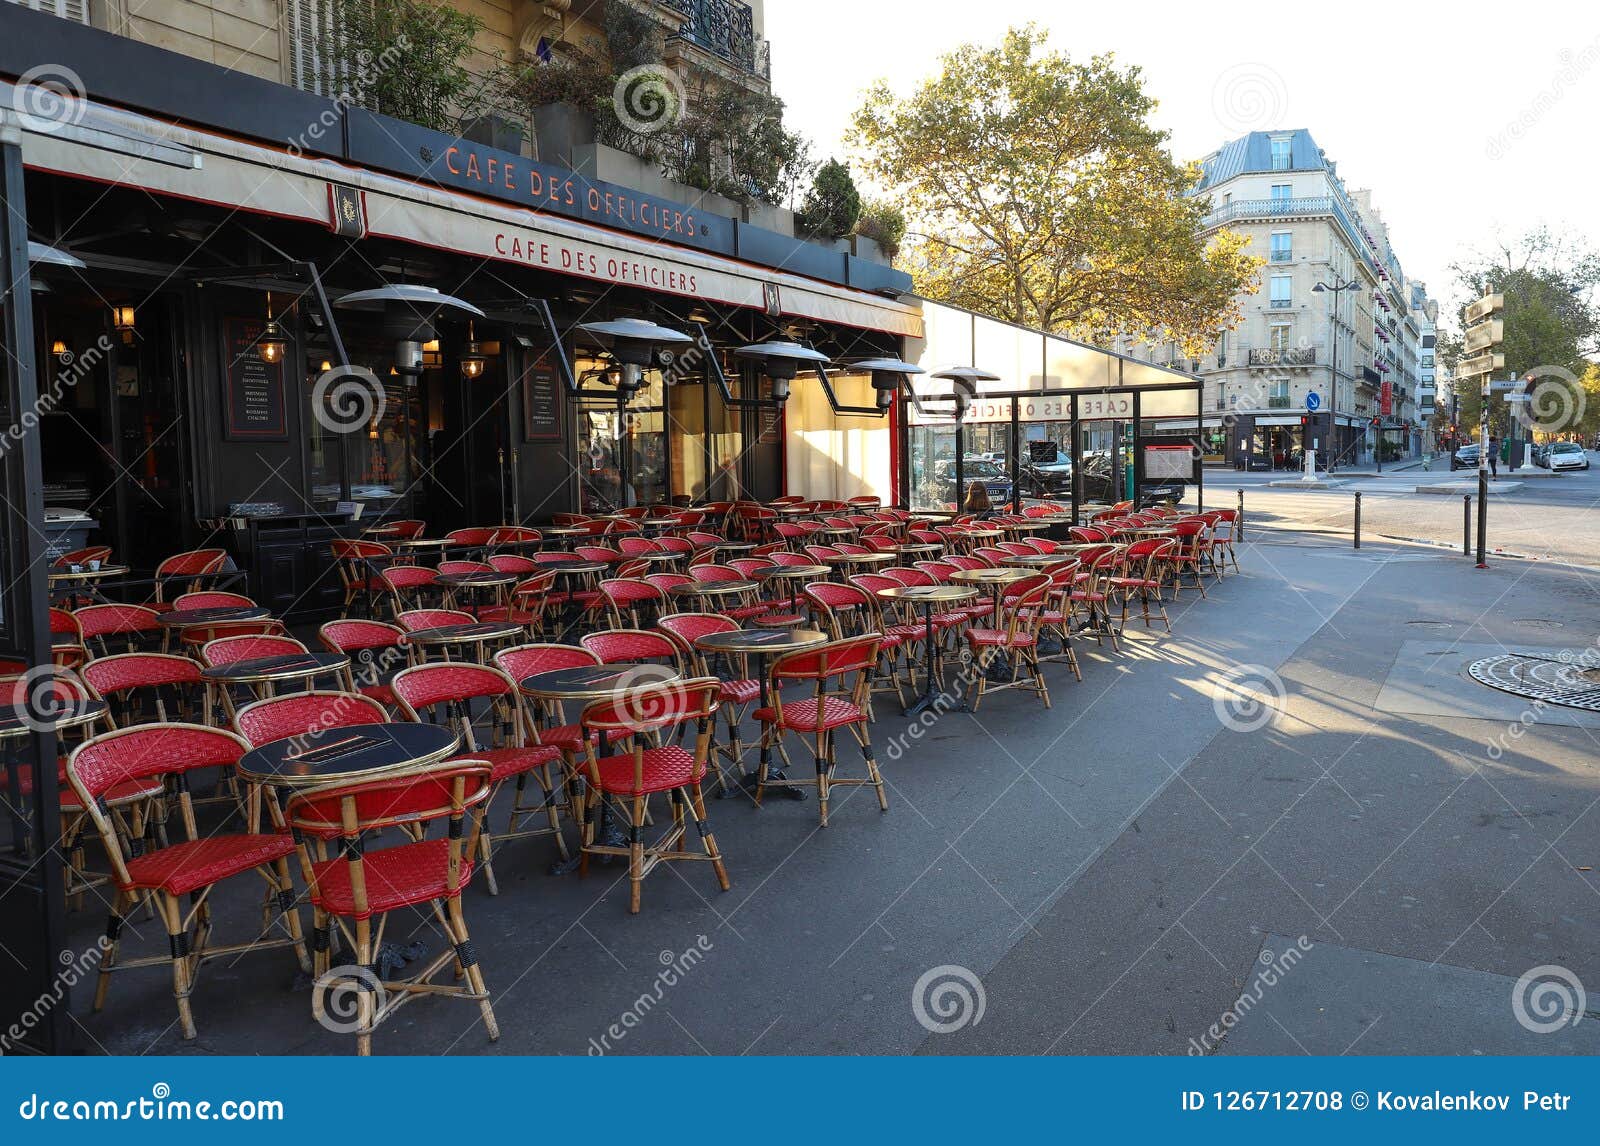 Cafe Des Officiers Is Traditonal French Cafe Located Near ...